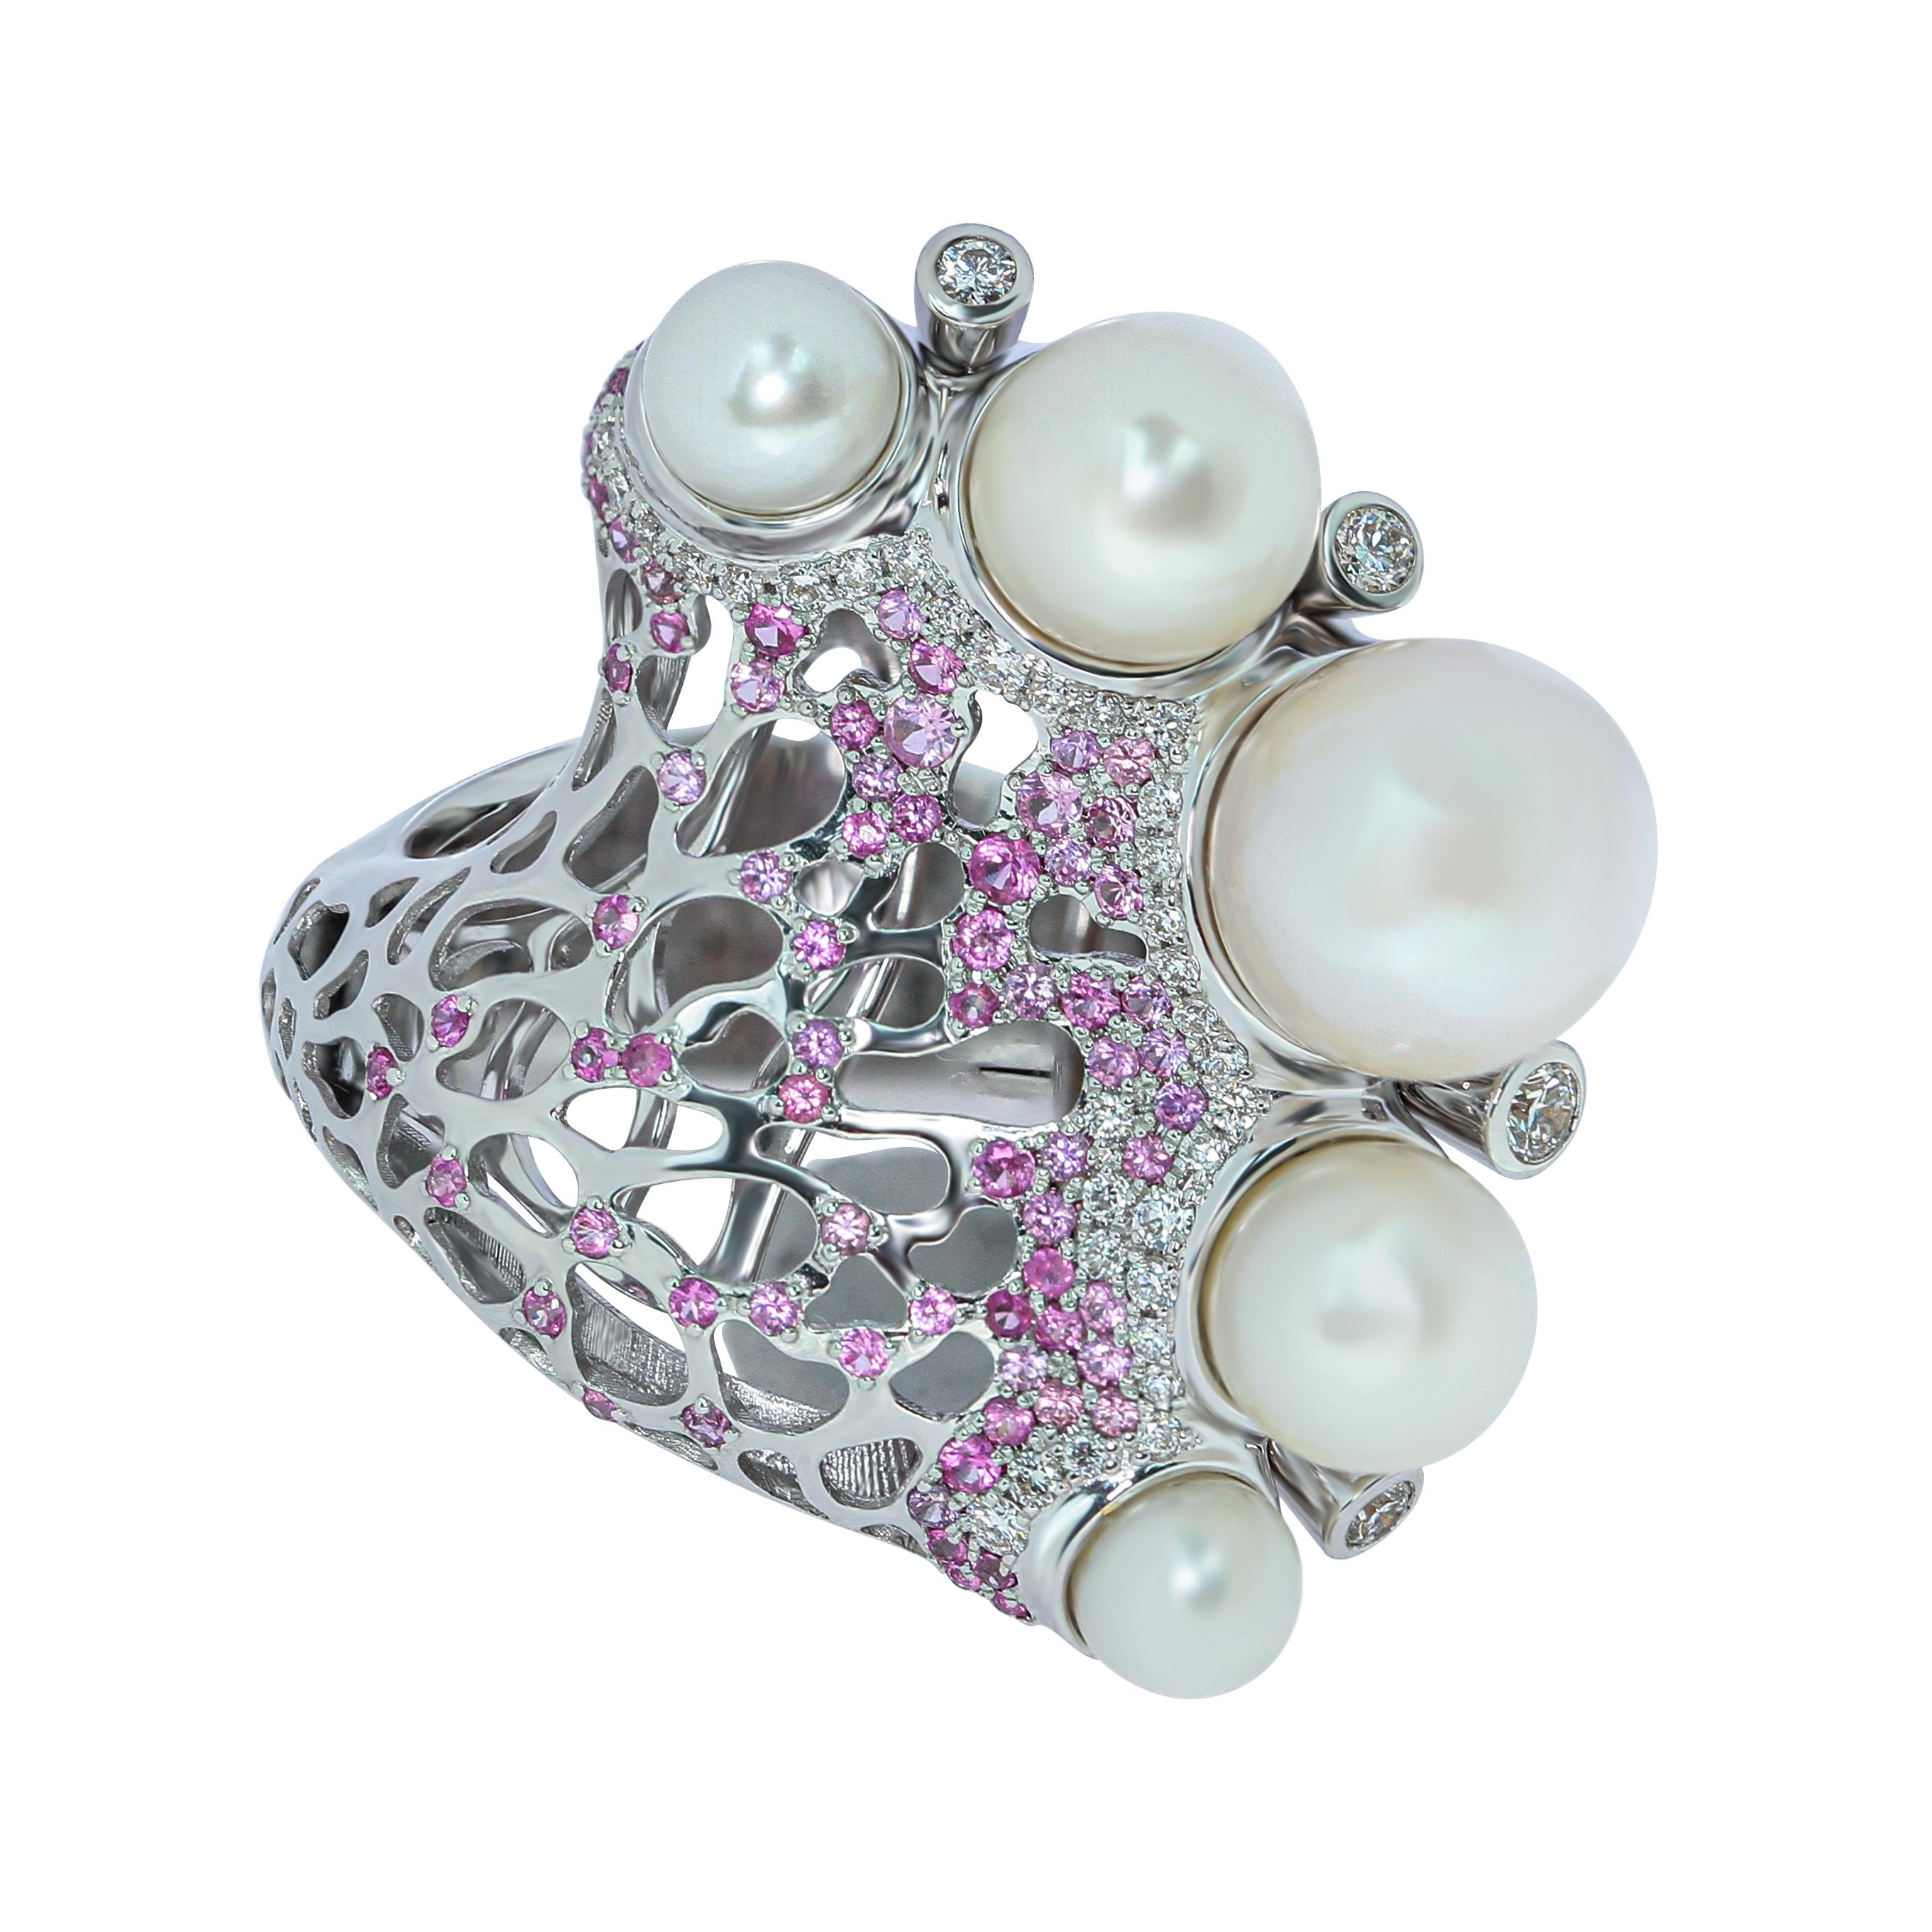 Pearls 5 pieces Diamonds Pink Sapphires 18 Karat White Gold Coral Reef Ring
Ring from Coral Reef Collection continues the marine theme. It resembles both coral and sea waves, as in the engraving by Katsushika Hokusai 